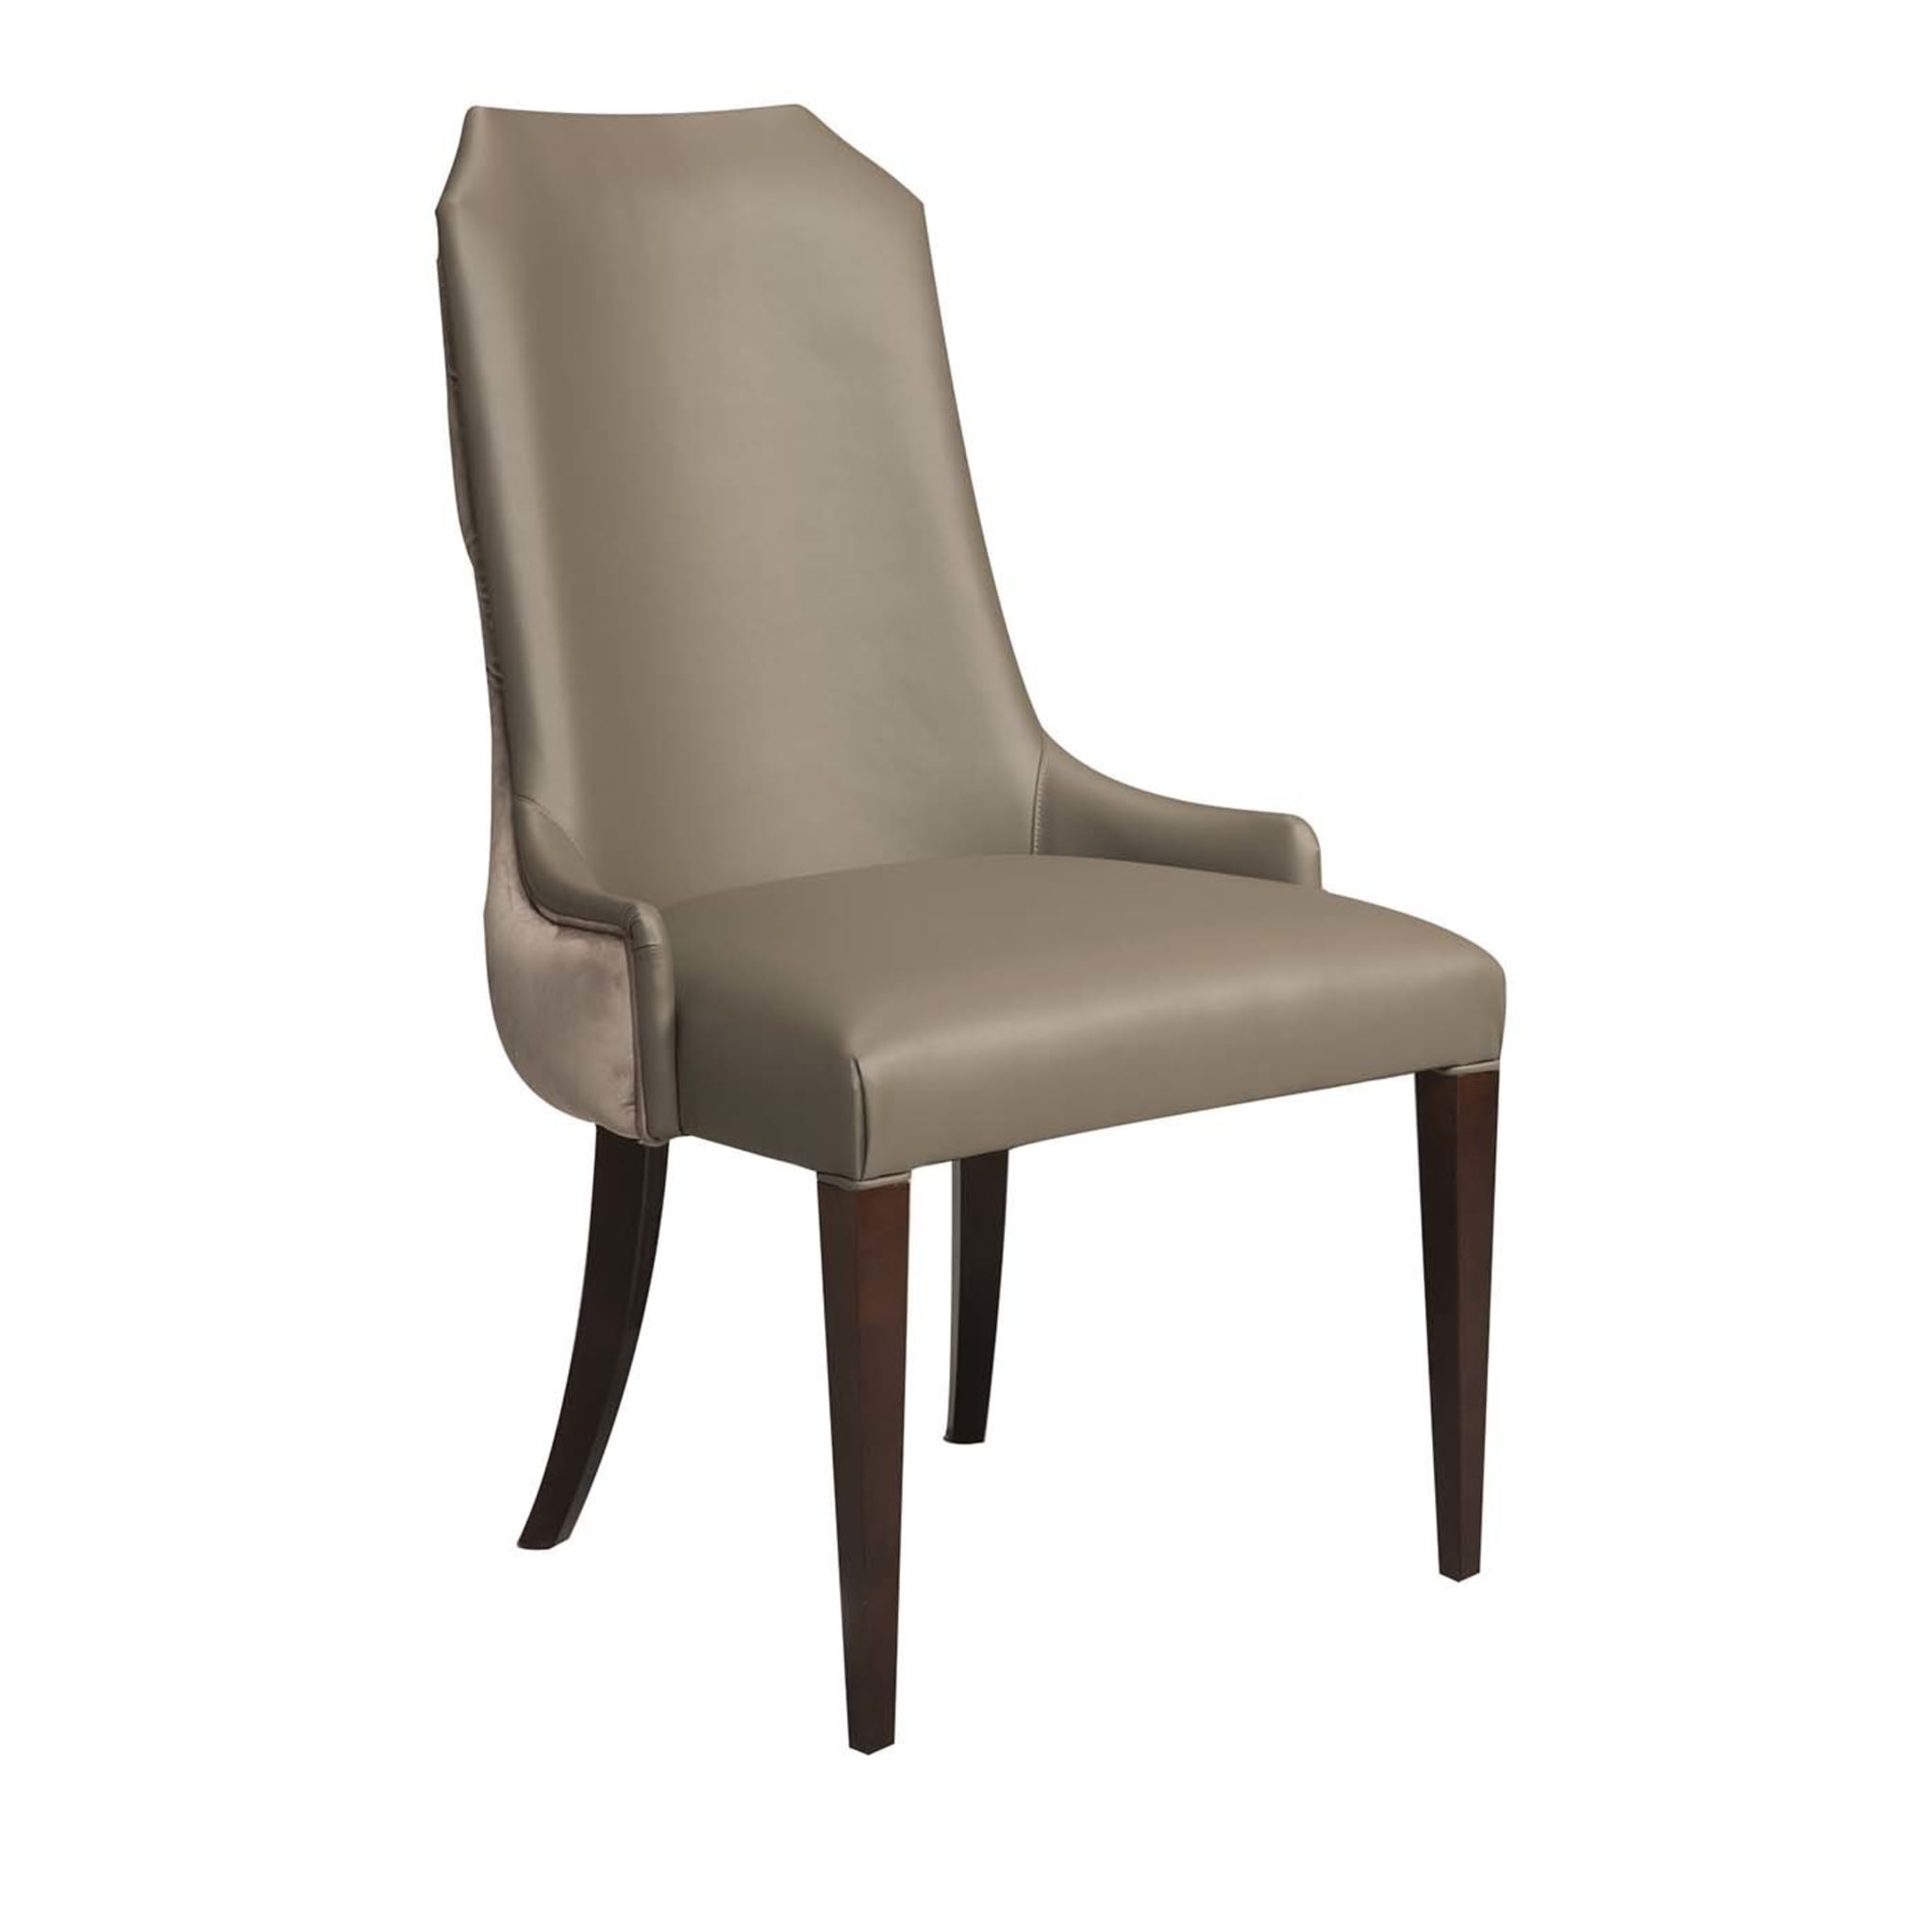 Oscar Tufted Upholstered Chair - Vue principale